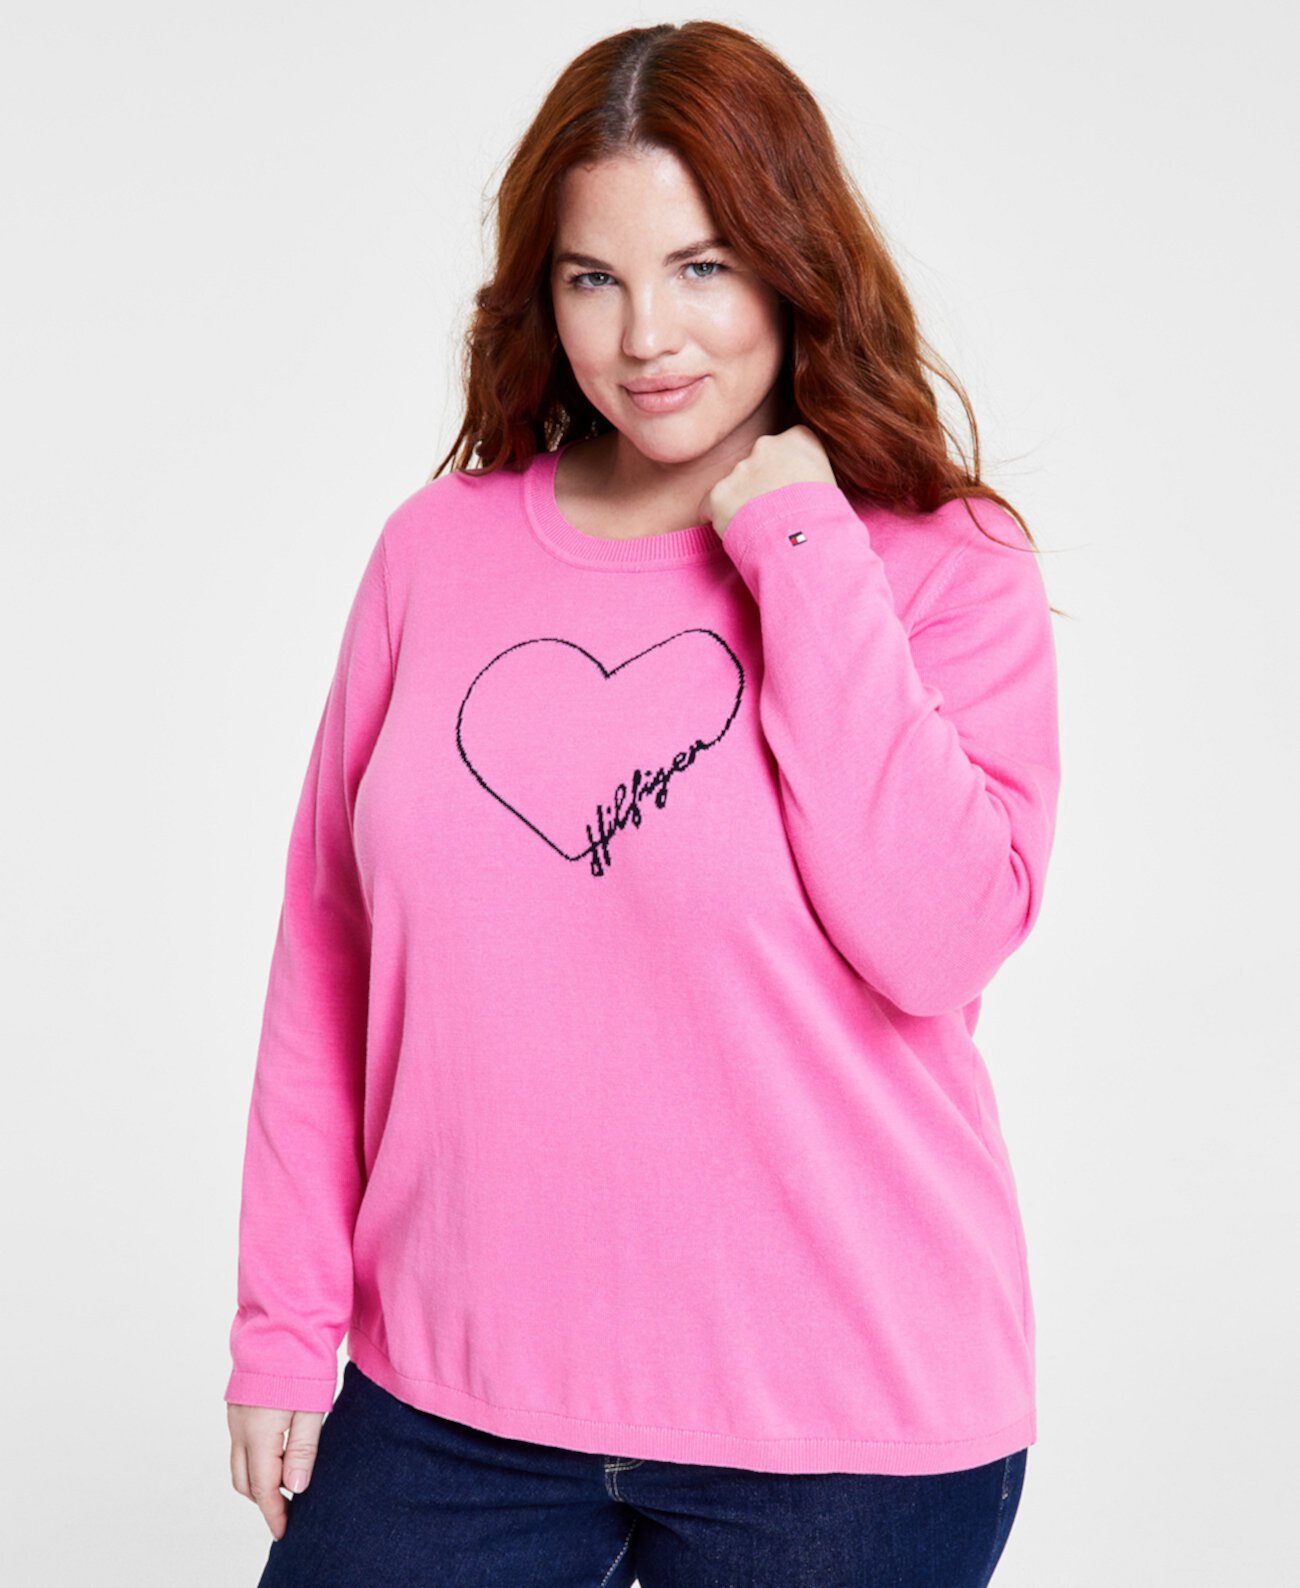 Plus Size Heart Outline Sweater Tommy Hilfiger